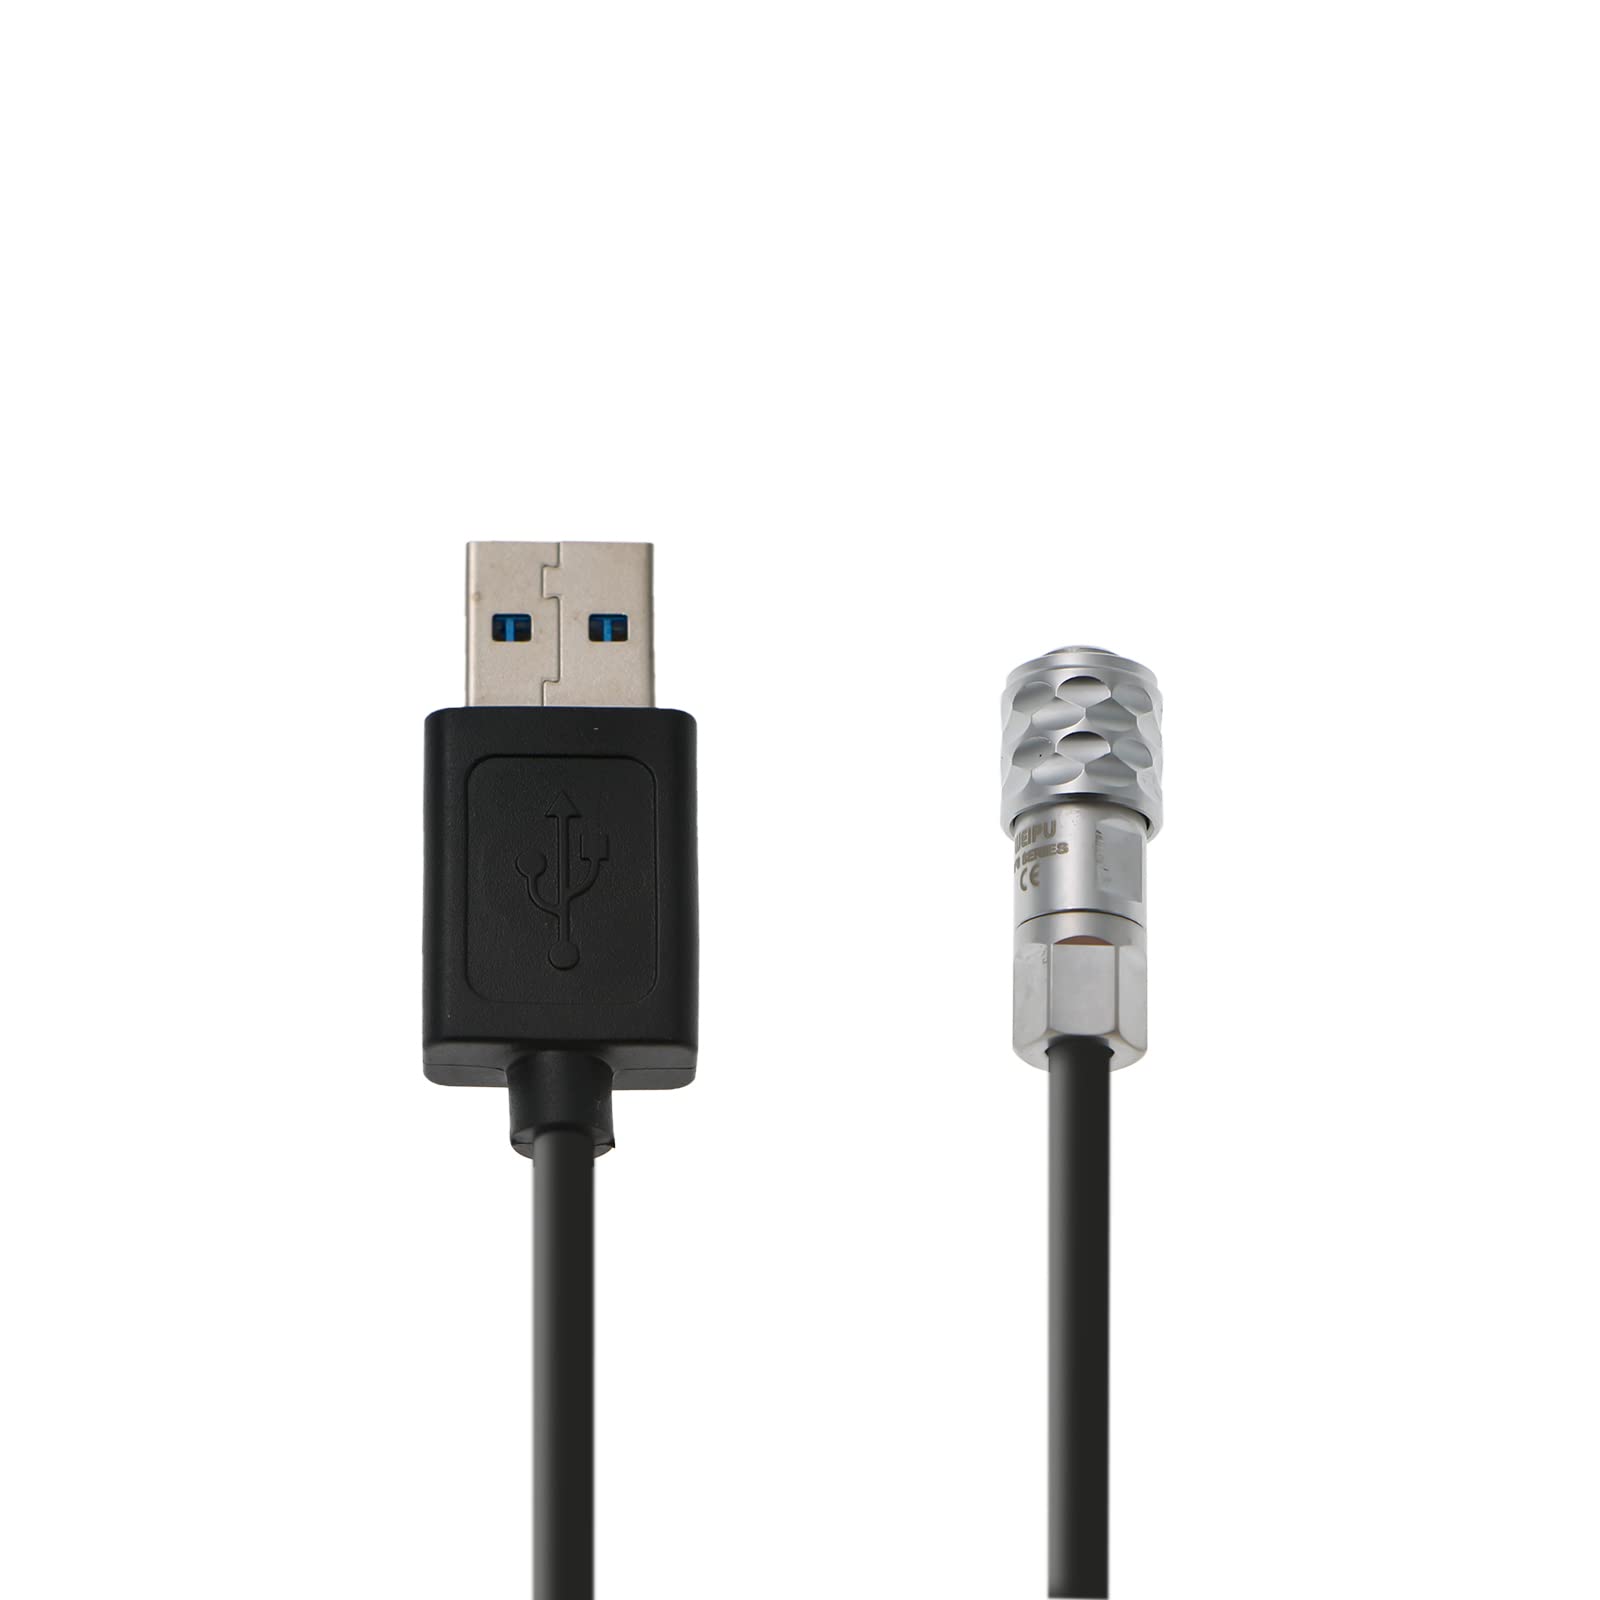 BMPCC-4K|6K Power-Cable for Blackmagic-Pocket-Cinema-Camera from Power-Bank USB QC 2.0|3.0 12V to 2-Pin Female Flexible Coiled Cable Alvin's Cables